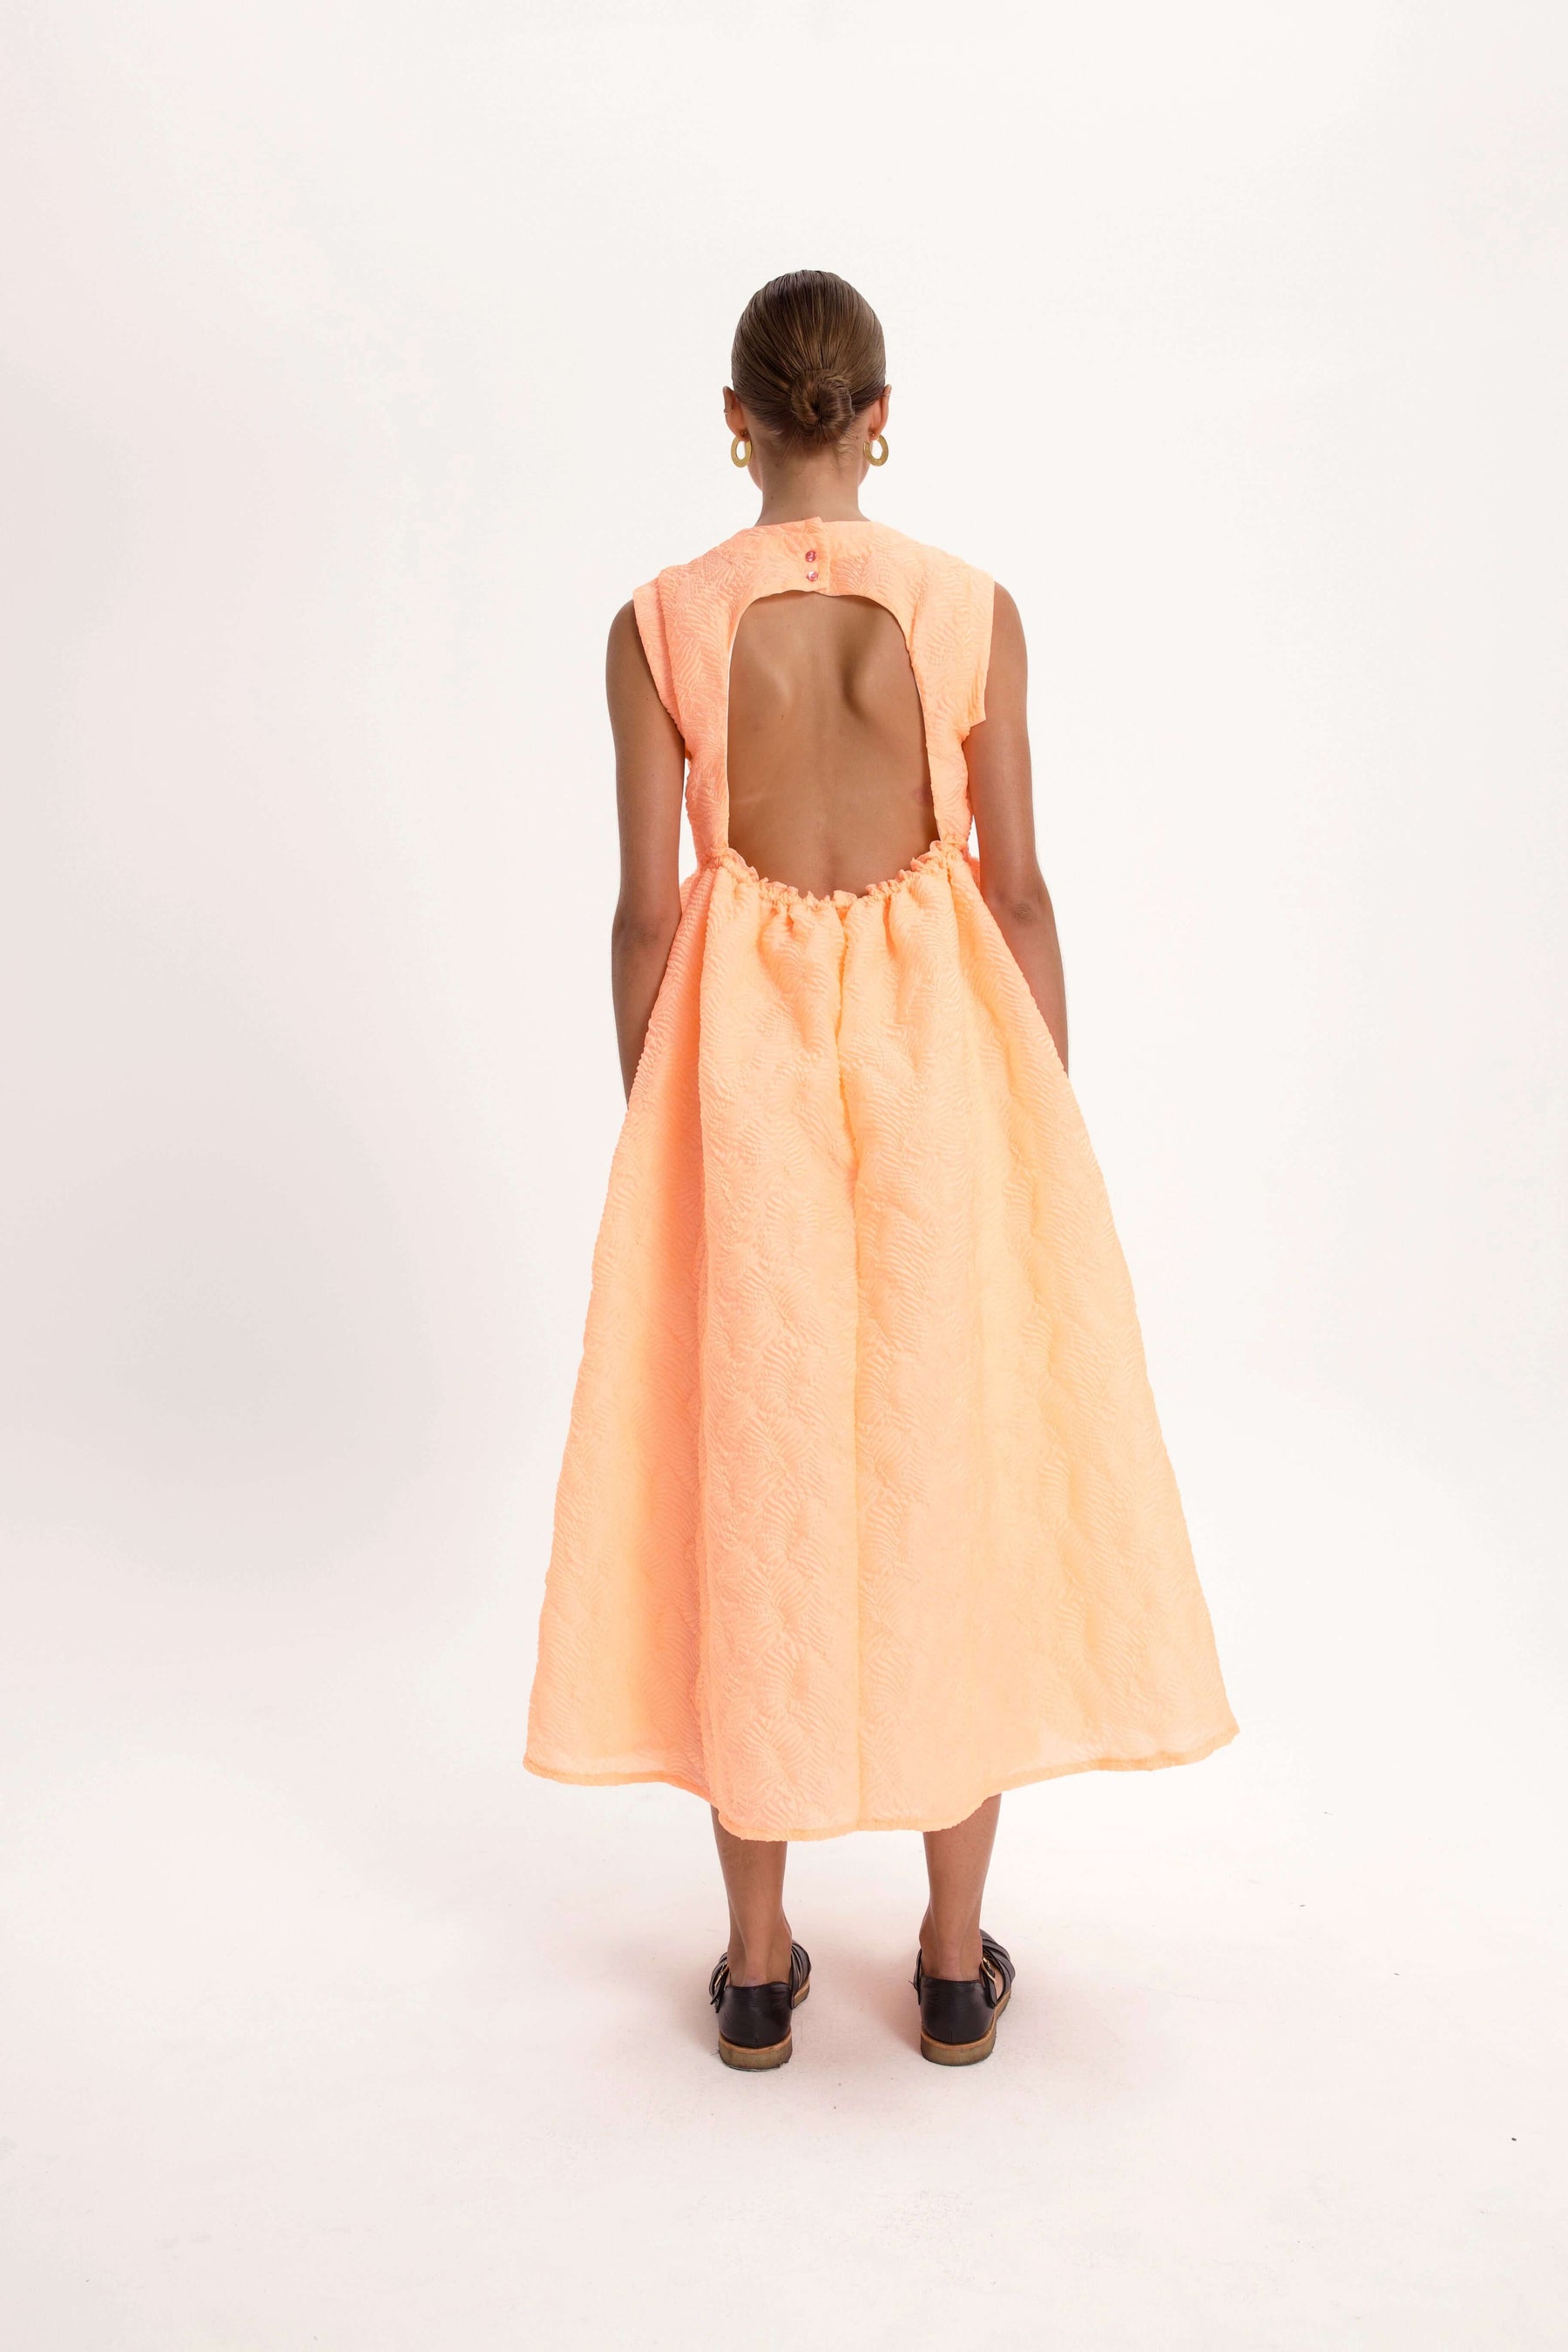 Thelma dress in Urchin Roe canvas